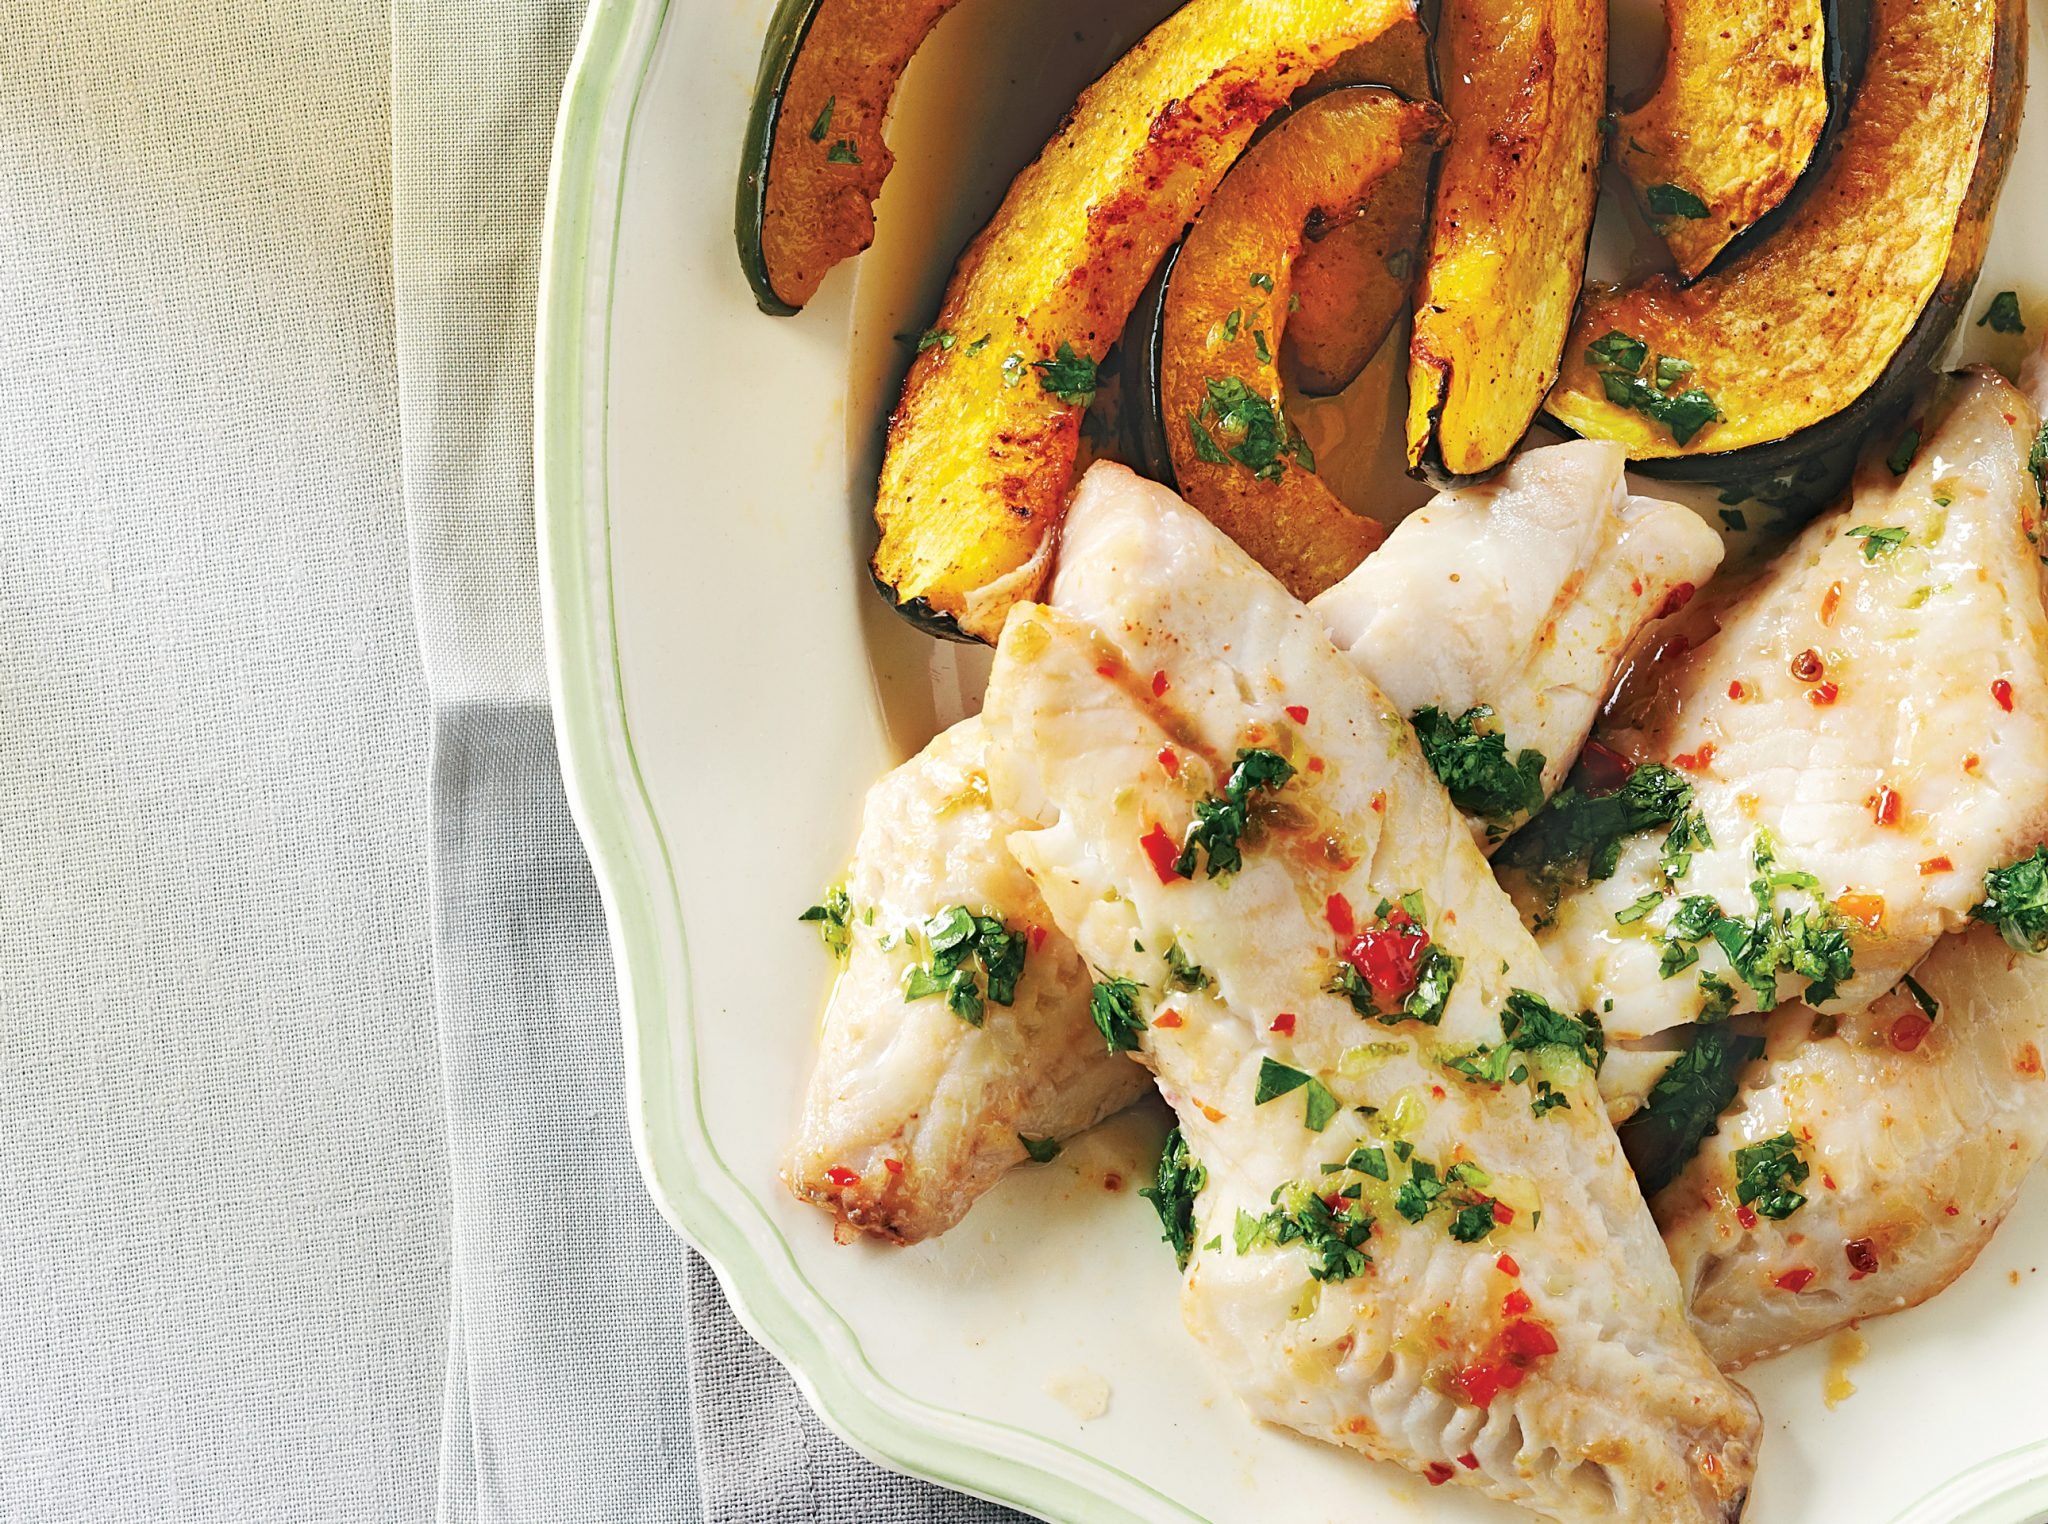 Roasted Perch Fillets and Squash with Cilantro-Lime Drizzle